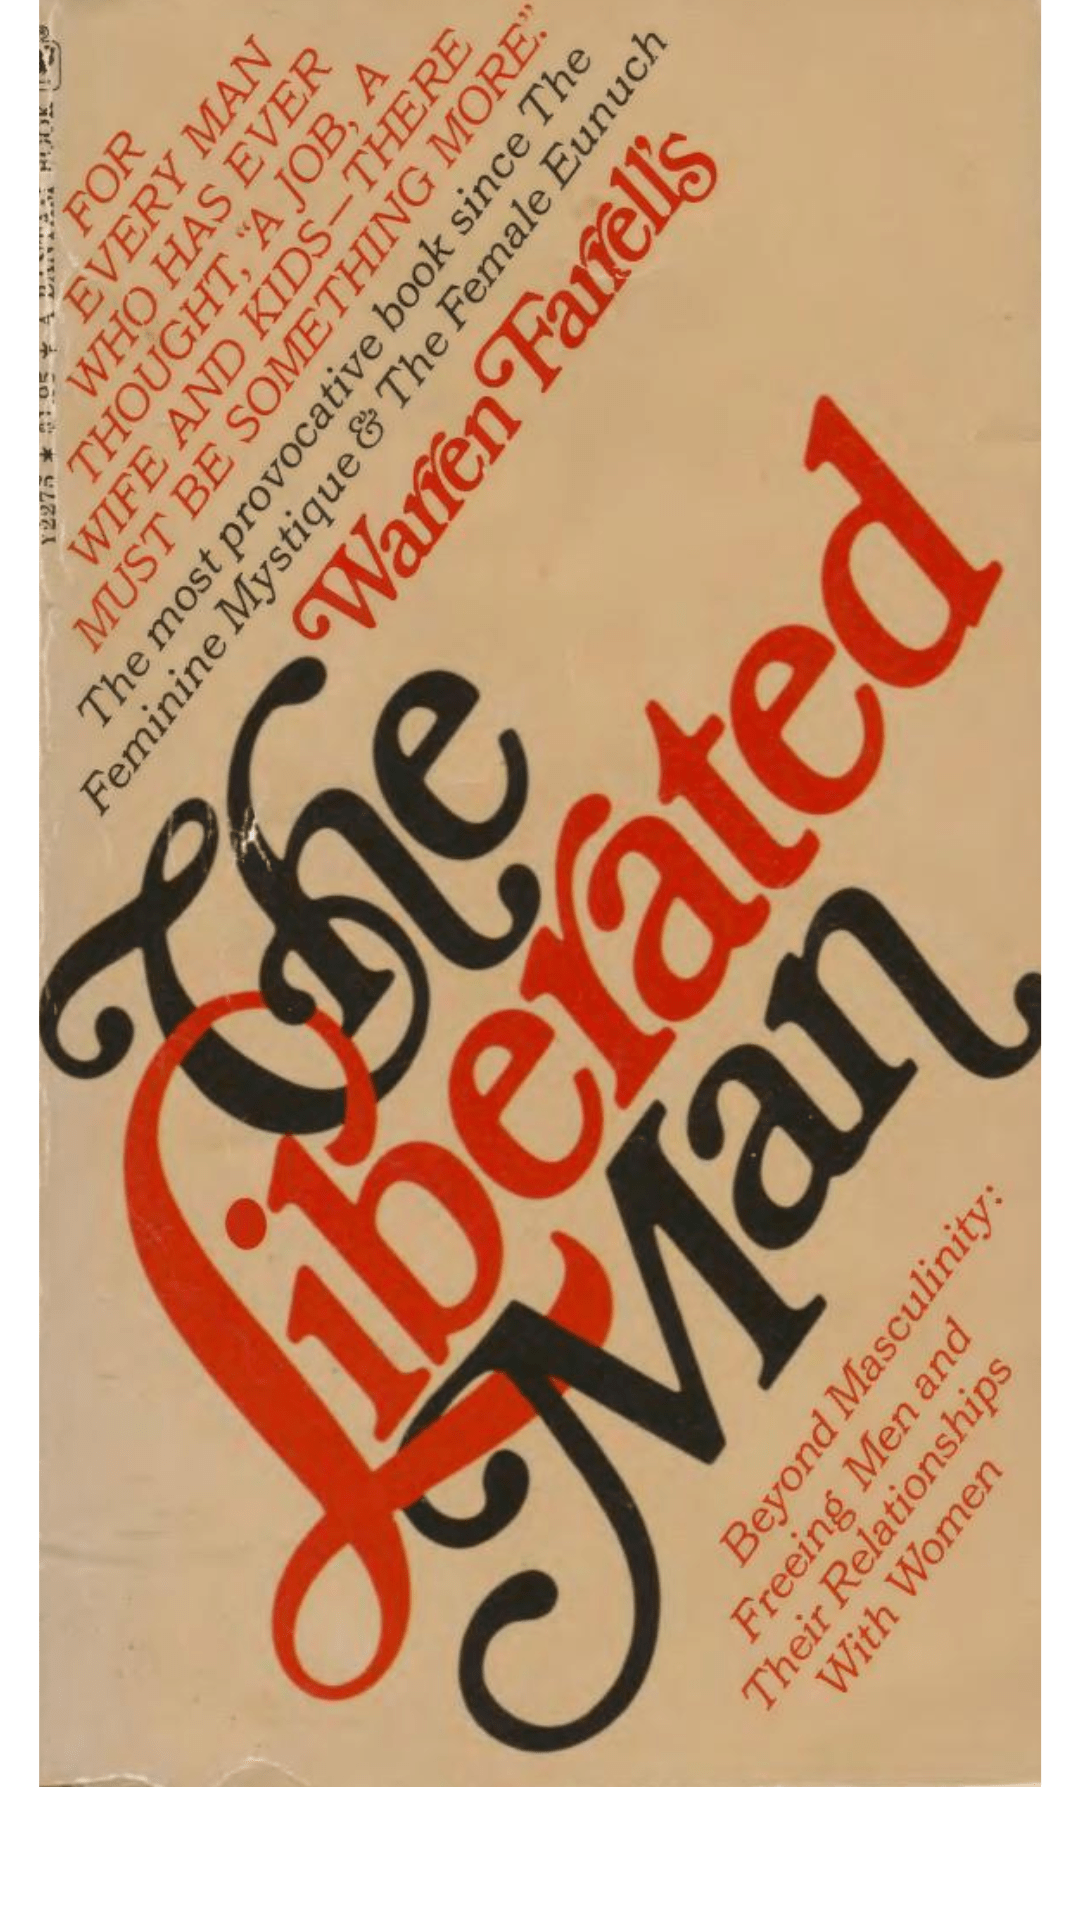 The liberated man: beyond masculinity;: Freeing men and their relationships with women